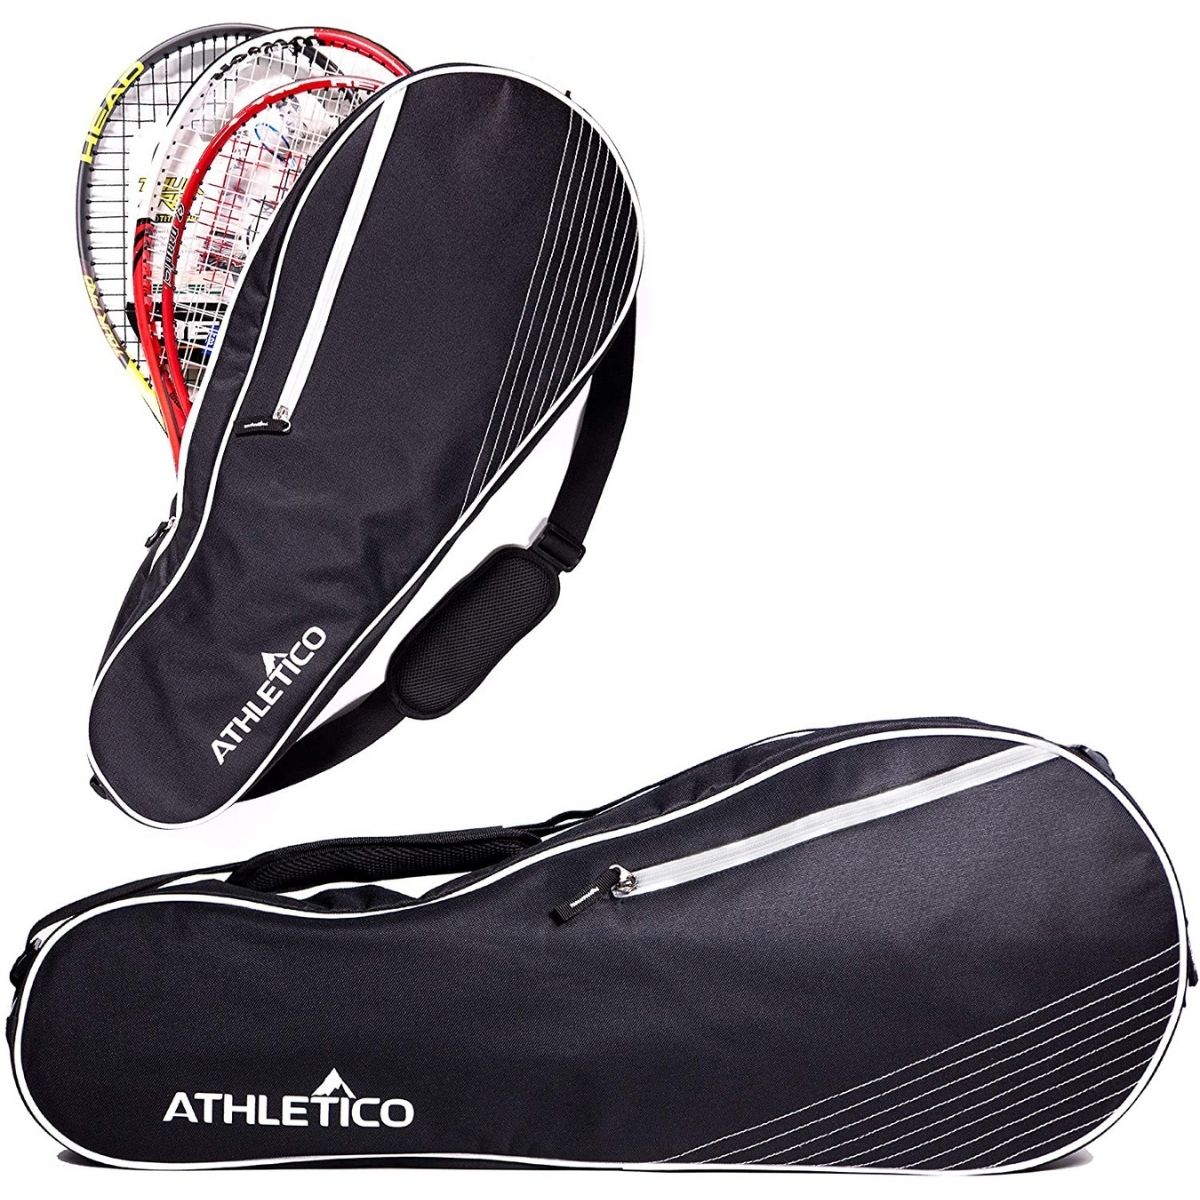 The Best Tennis Bags Options: Athletico 3-Racket Bag 